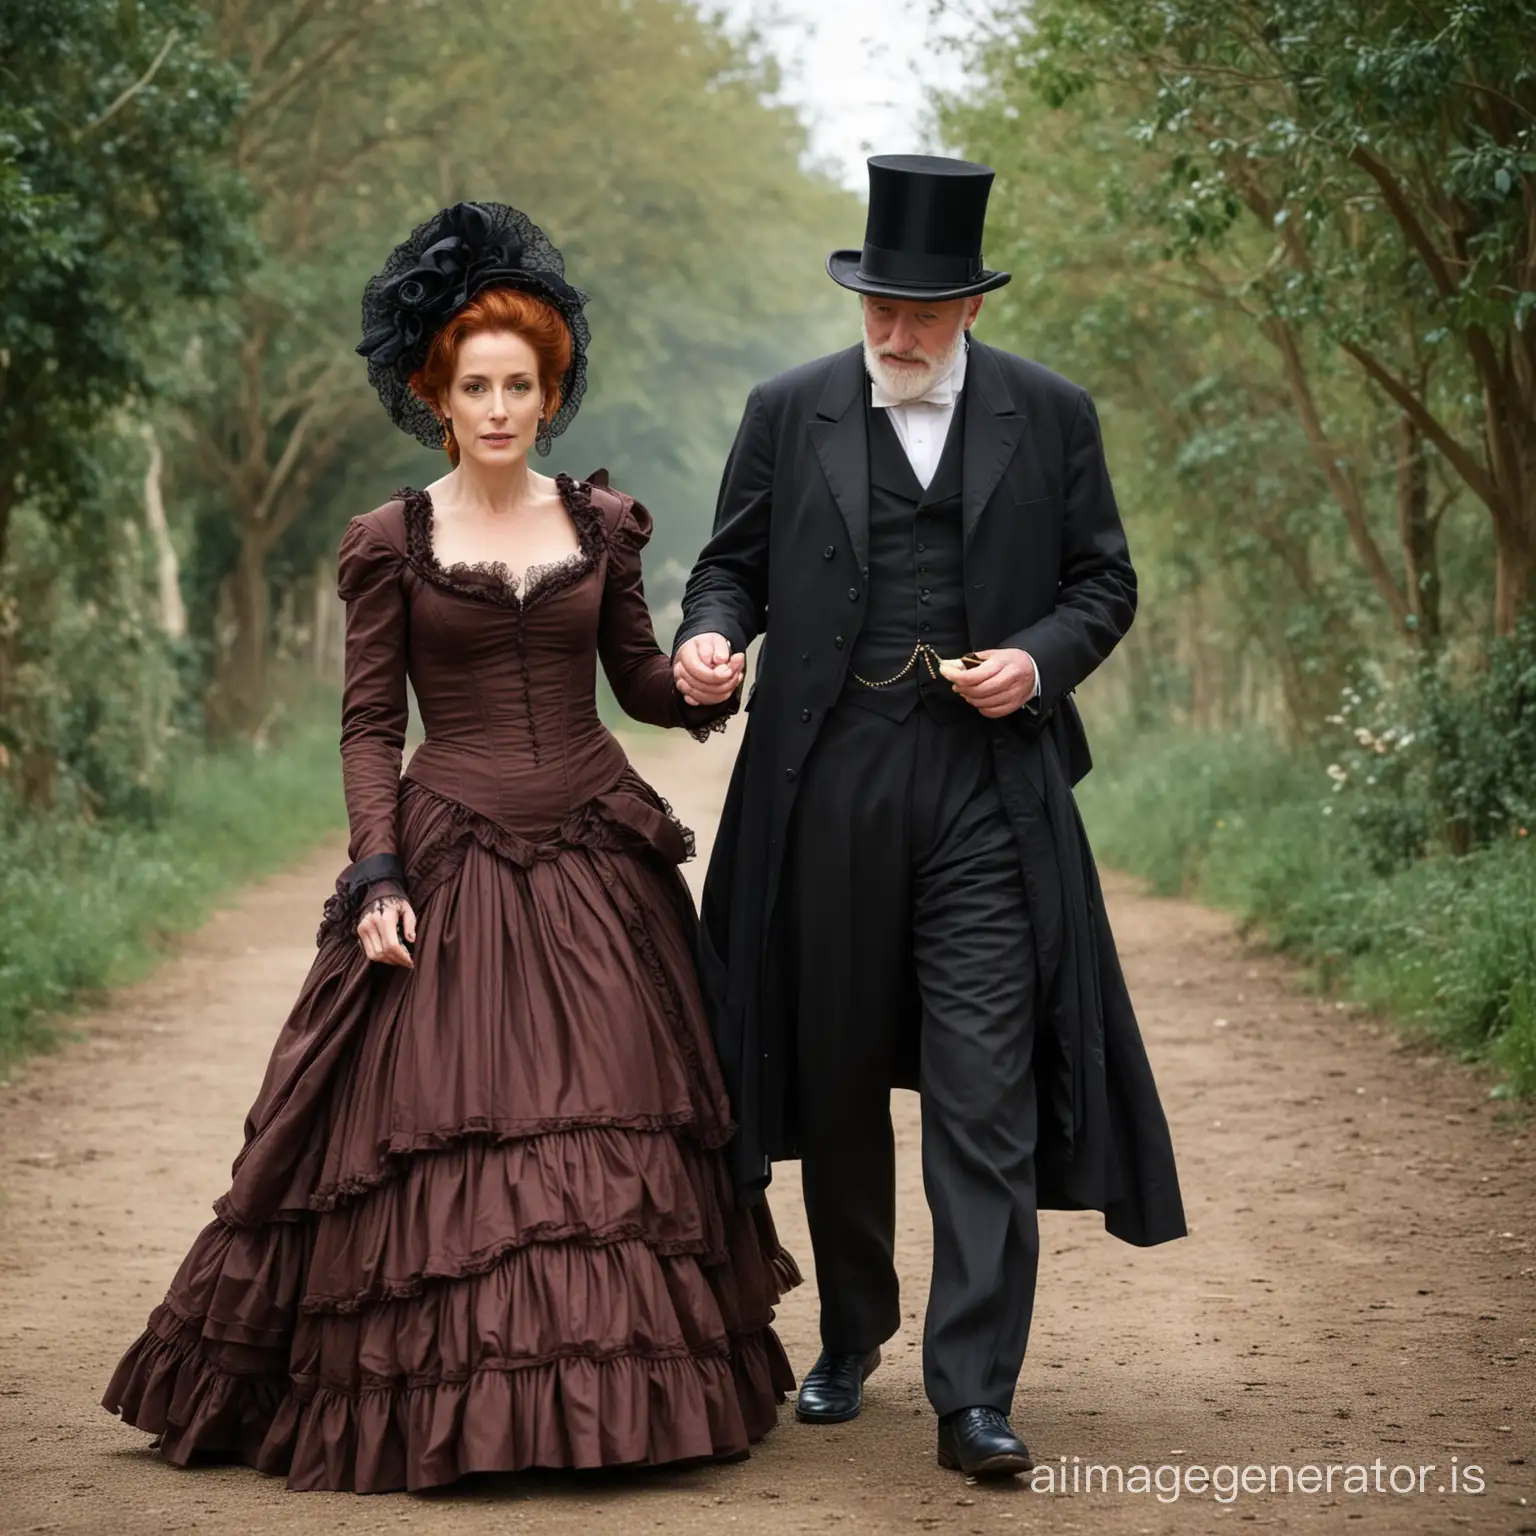 red hair Gillian Anderson wearing a dark brown floor-length loose billowing 1860 Victorian crinoline dress with a frilly bonnet walking hand in hand with an old man dressed into a black Victorian suit who seems to be her newlywed husband